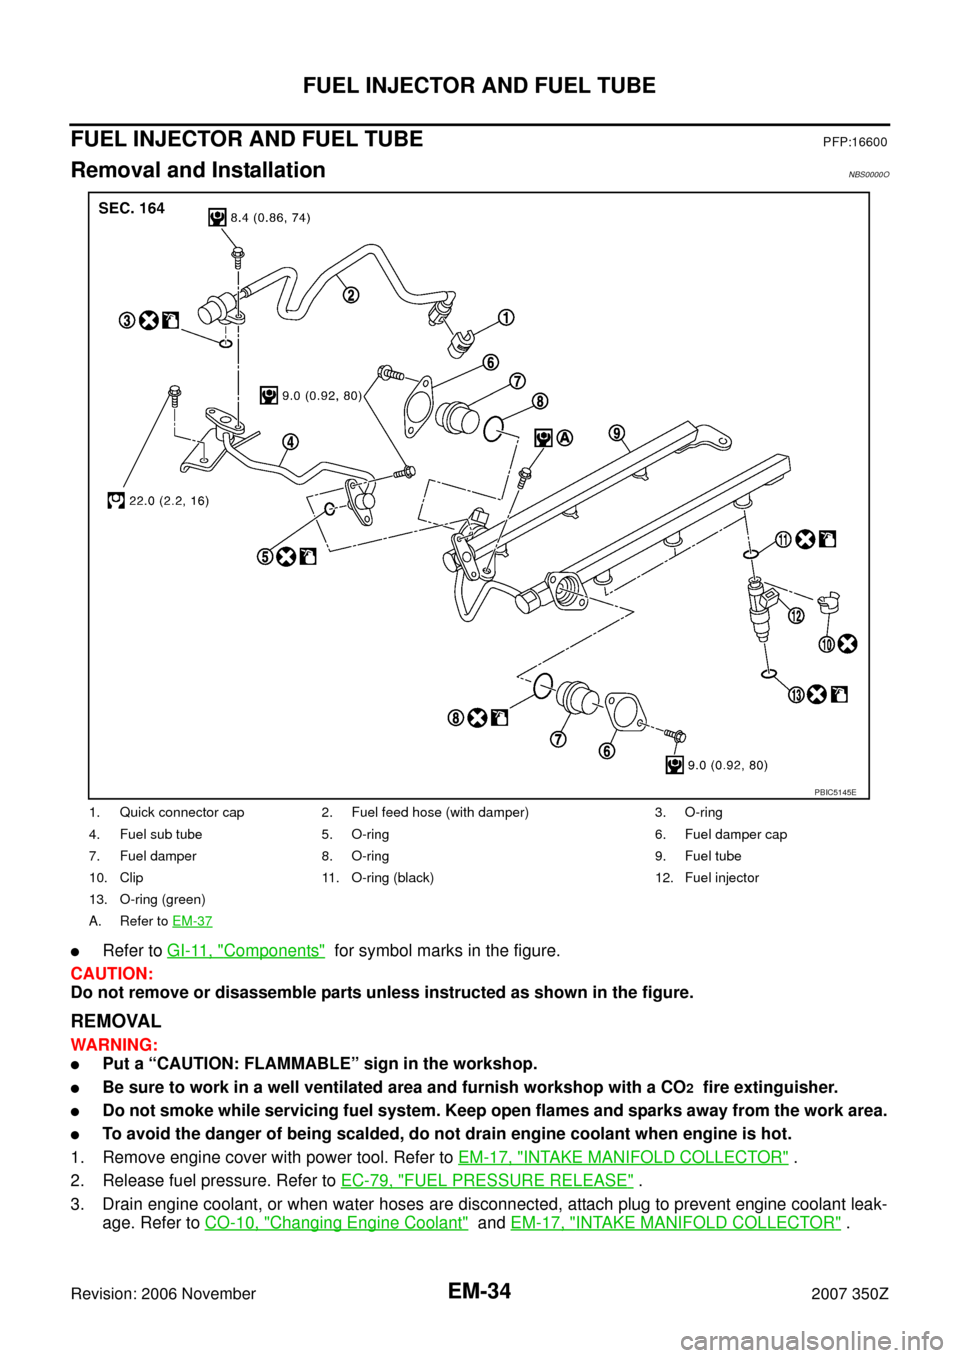 NISSAN 350Z 2007 Z33 Engine Mechanical Owners Guide EM-34
FUEL INJECTOR AND FUEL TUBE
Revision: 2006 November2007 350Z
FUEL INJECTOR AND FUEL TUBEPFP:16600
Removal and InstallationNBS0000O
Refer to GI-11, "Components"  for symbol marks in the figure.
